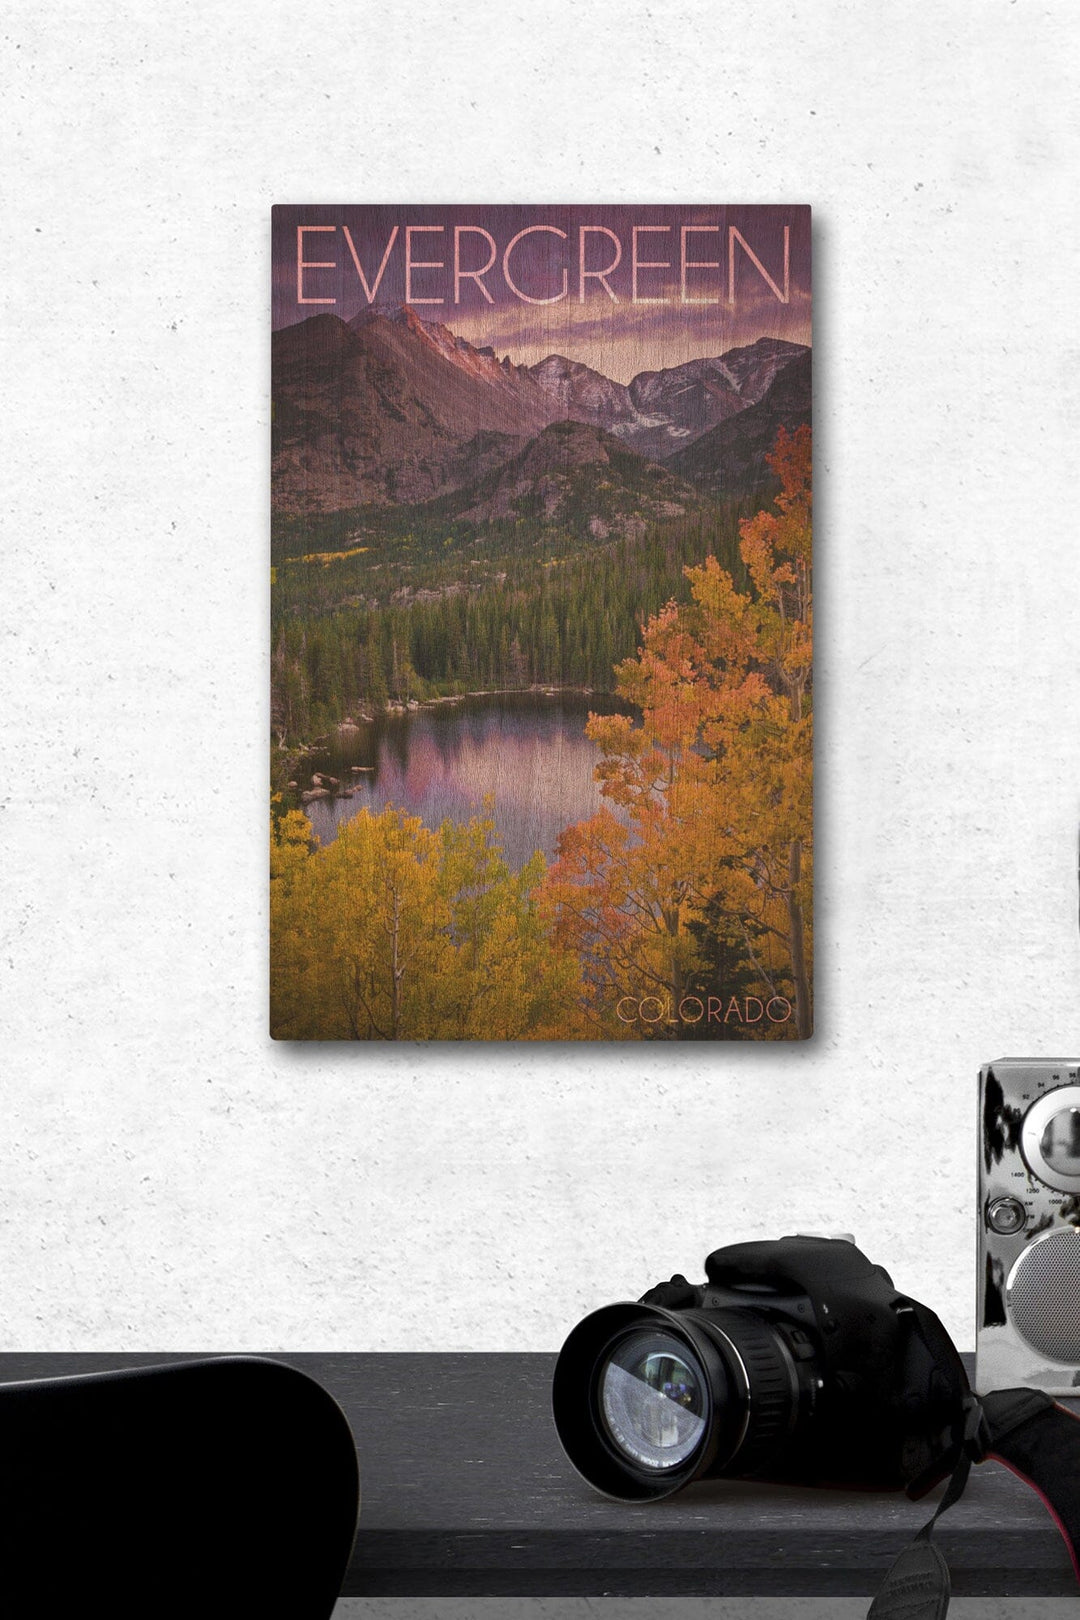 Evergreen, Colorado, Rocky Mountain National Park, Purple Sunset & Lake, Photography, Wood Signs and Postcards Wood Lantern Press 12 x 18 Wood Gallery Print 